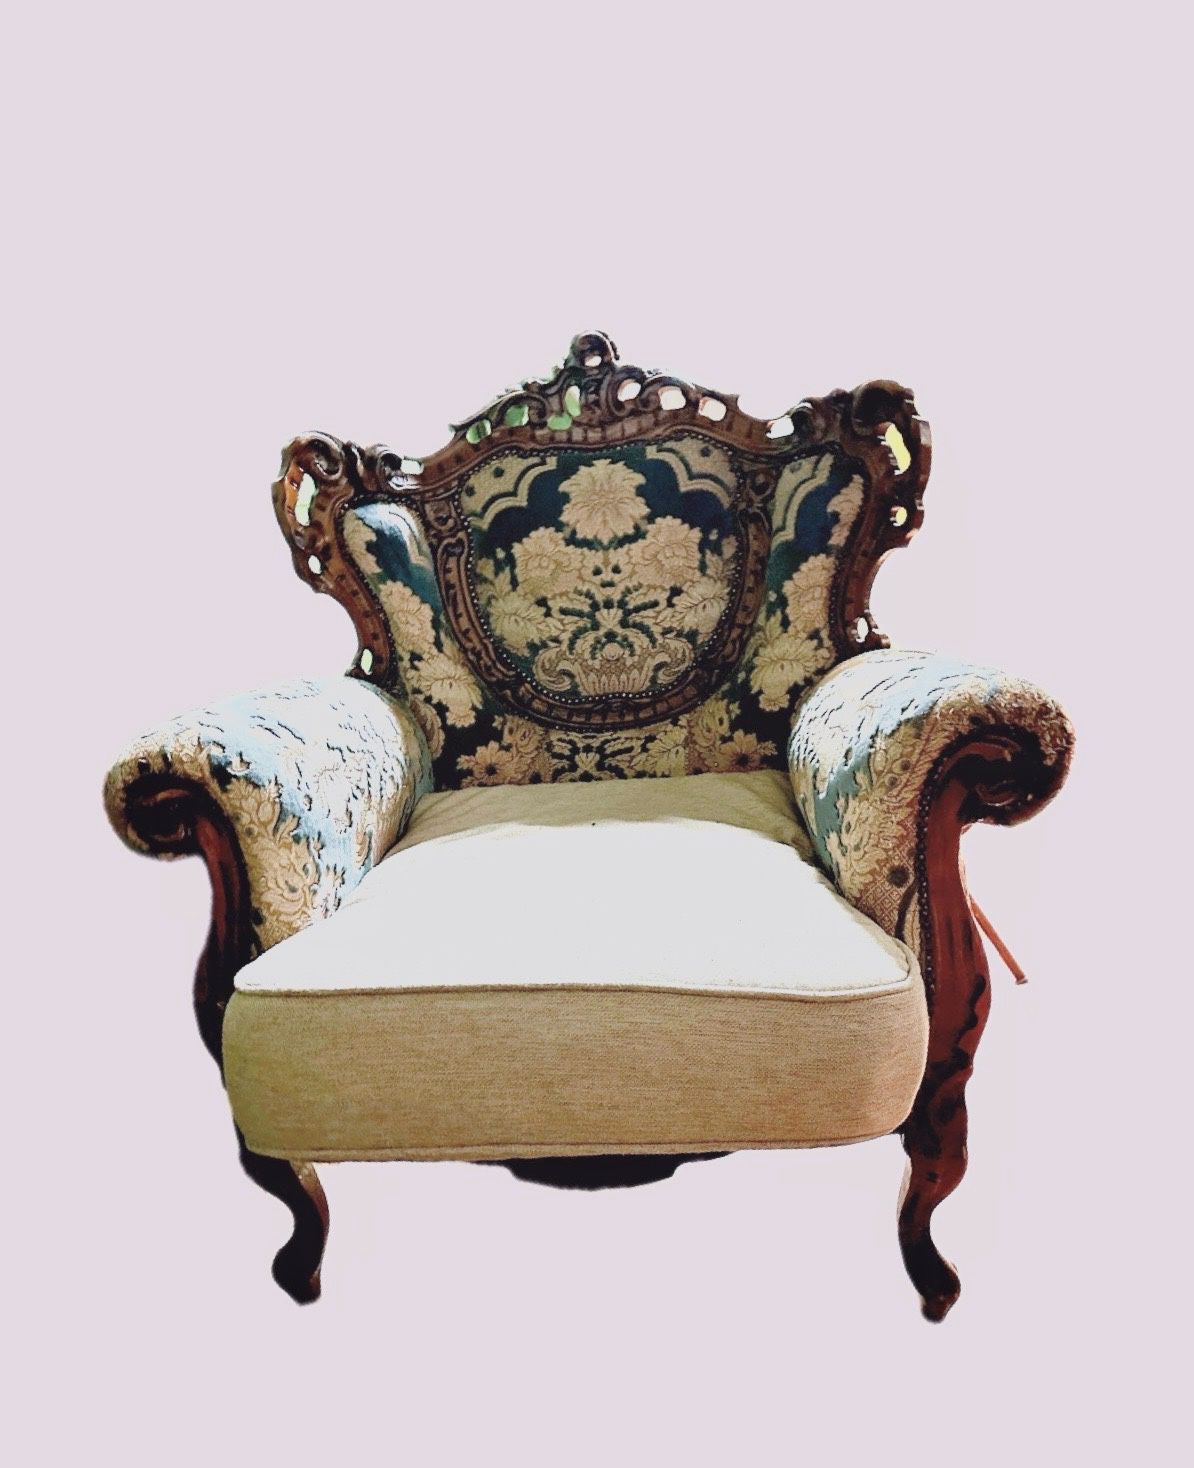 Italian Baroque Upholstered Bergère Chair Reproduction 